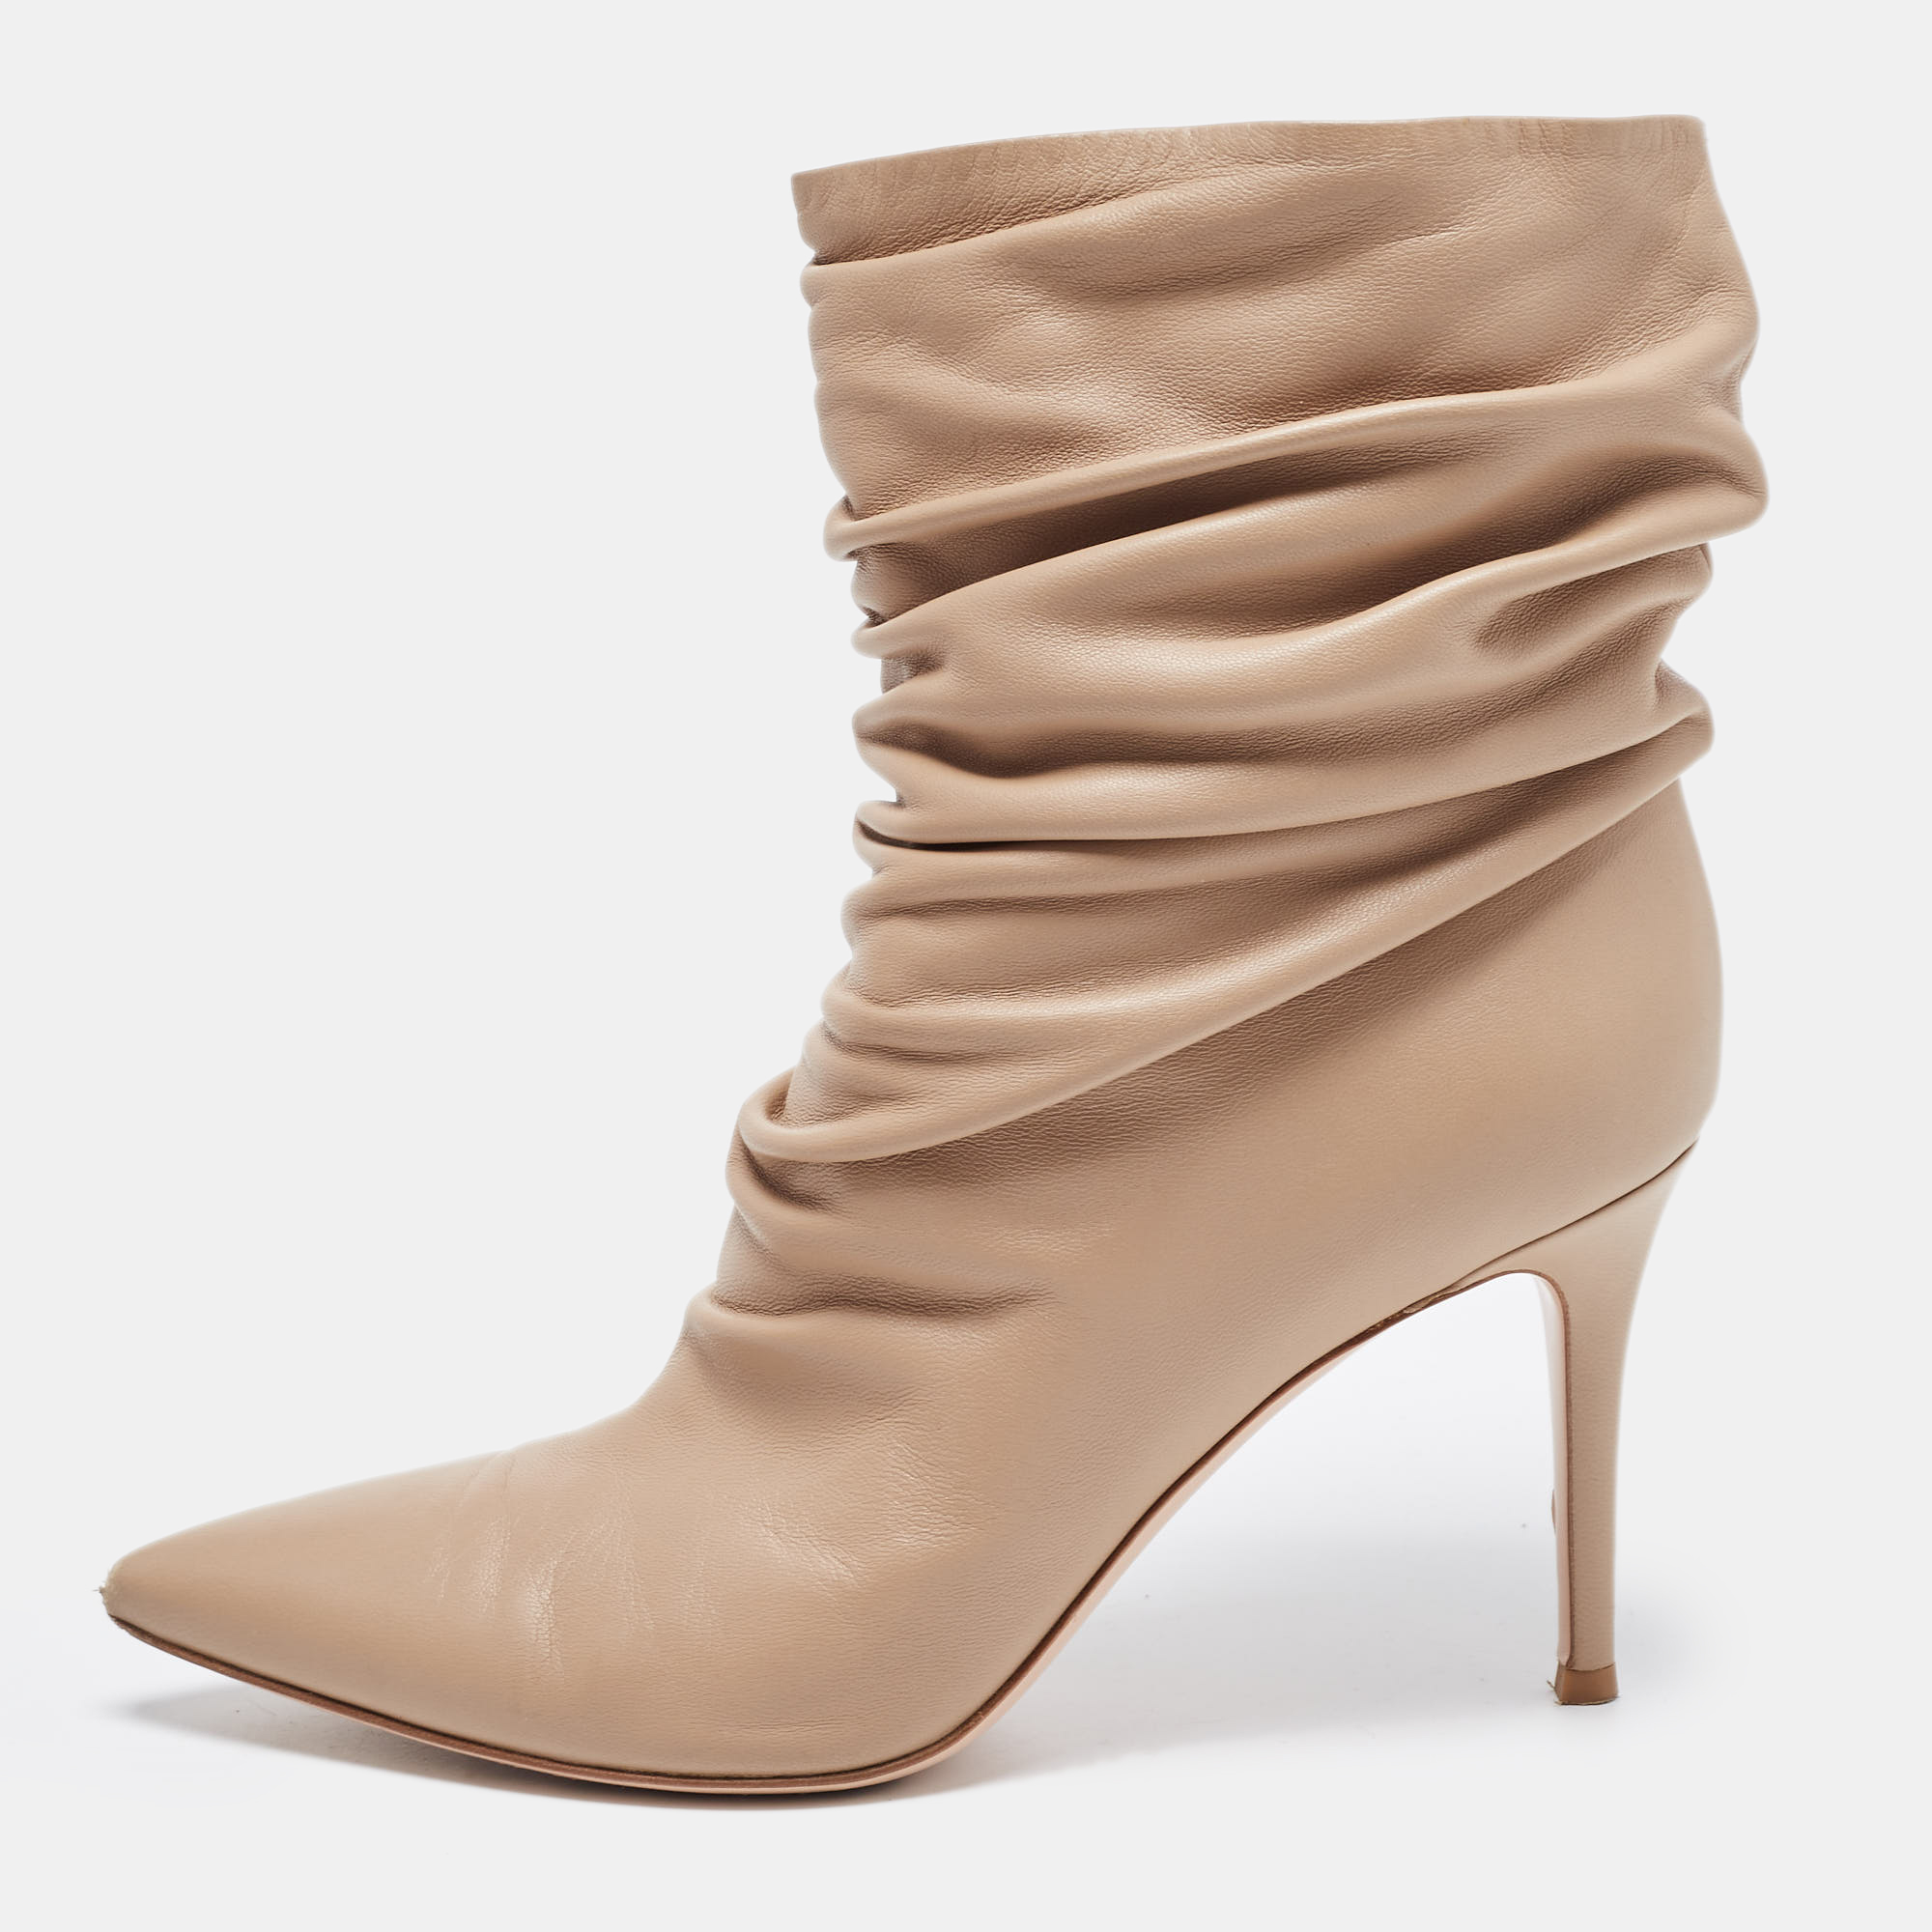 Pre-owned Gianvito Rossi Beige Leather Ruched Ankle Boots Size 39